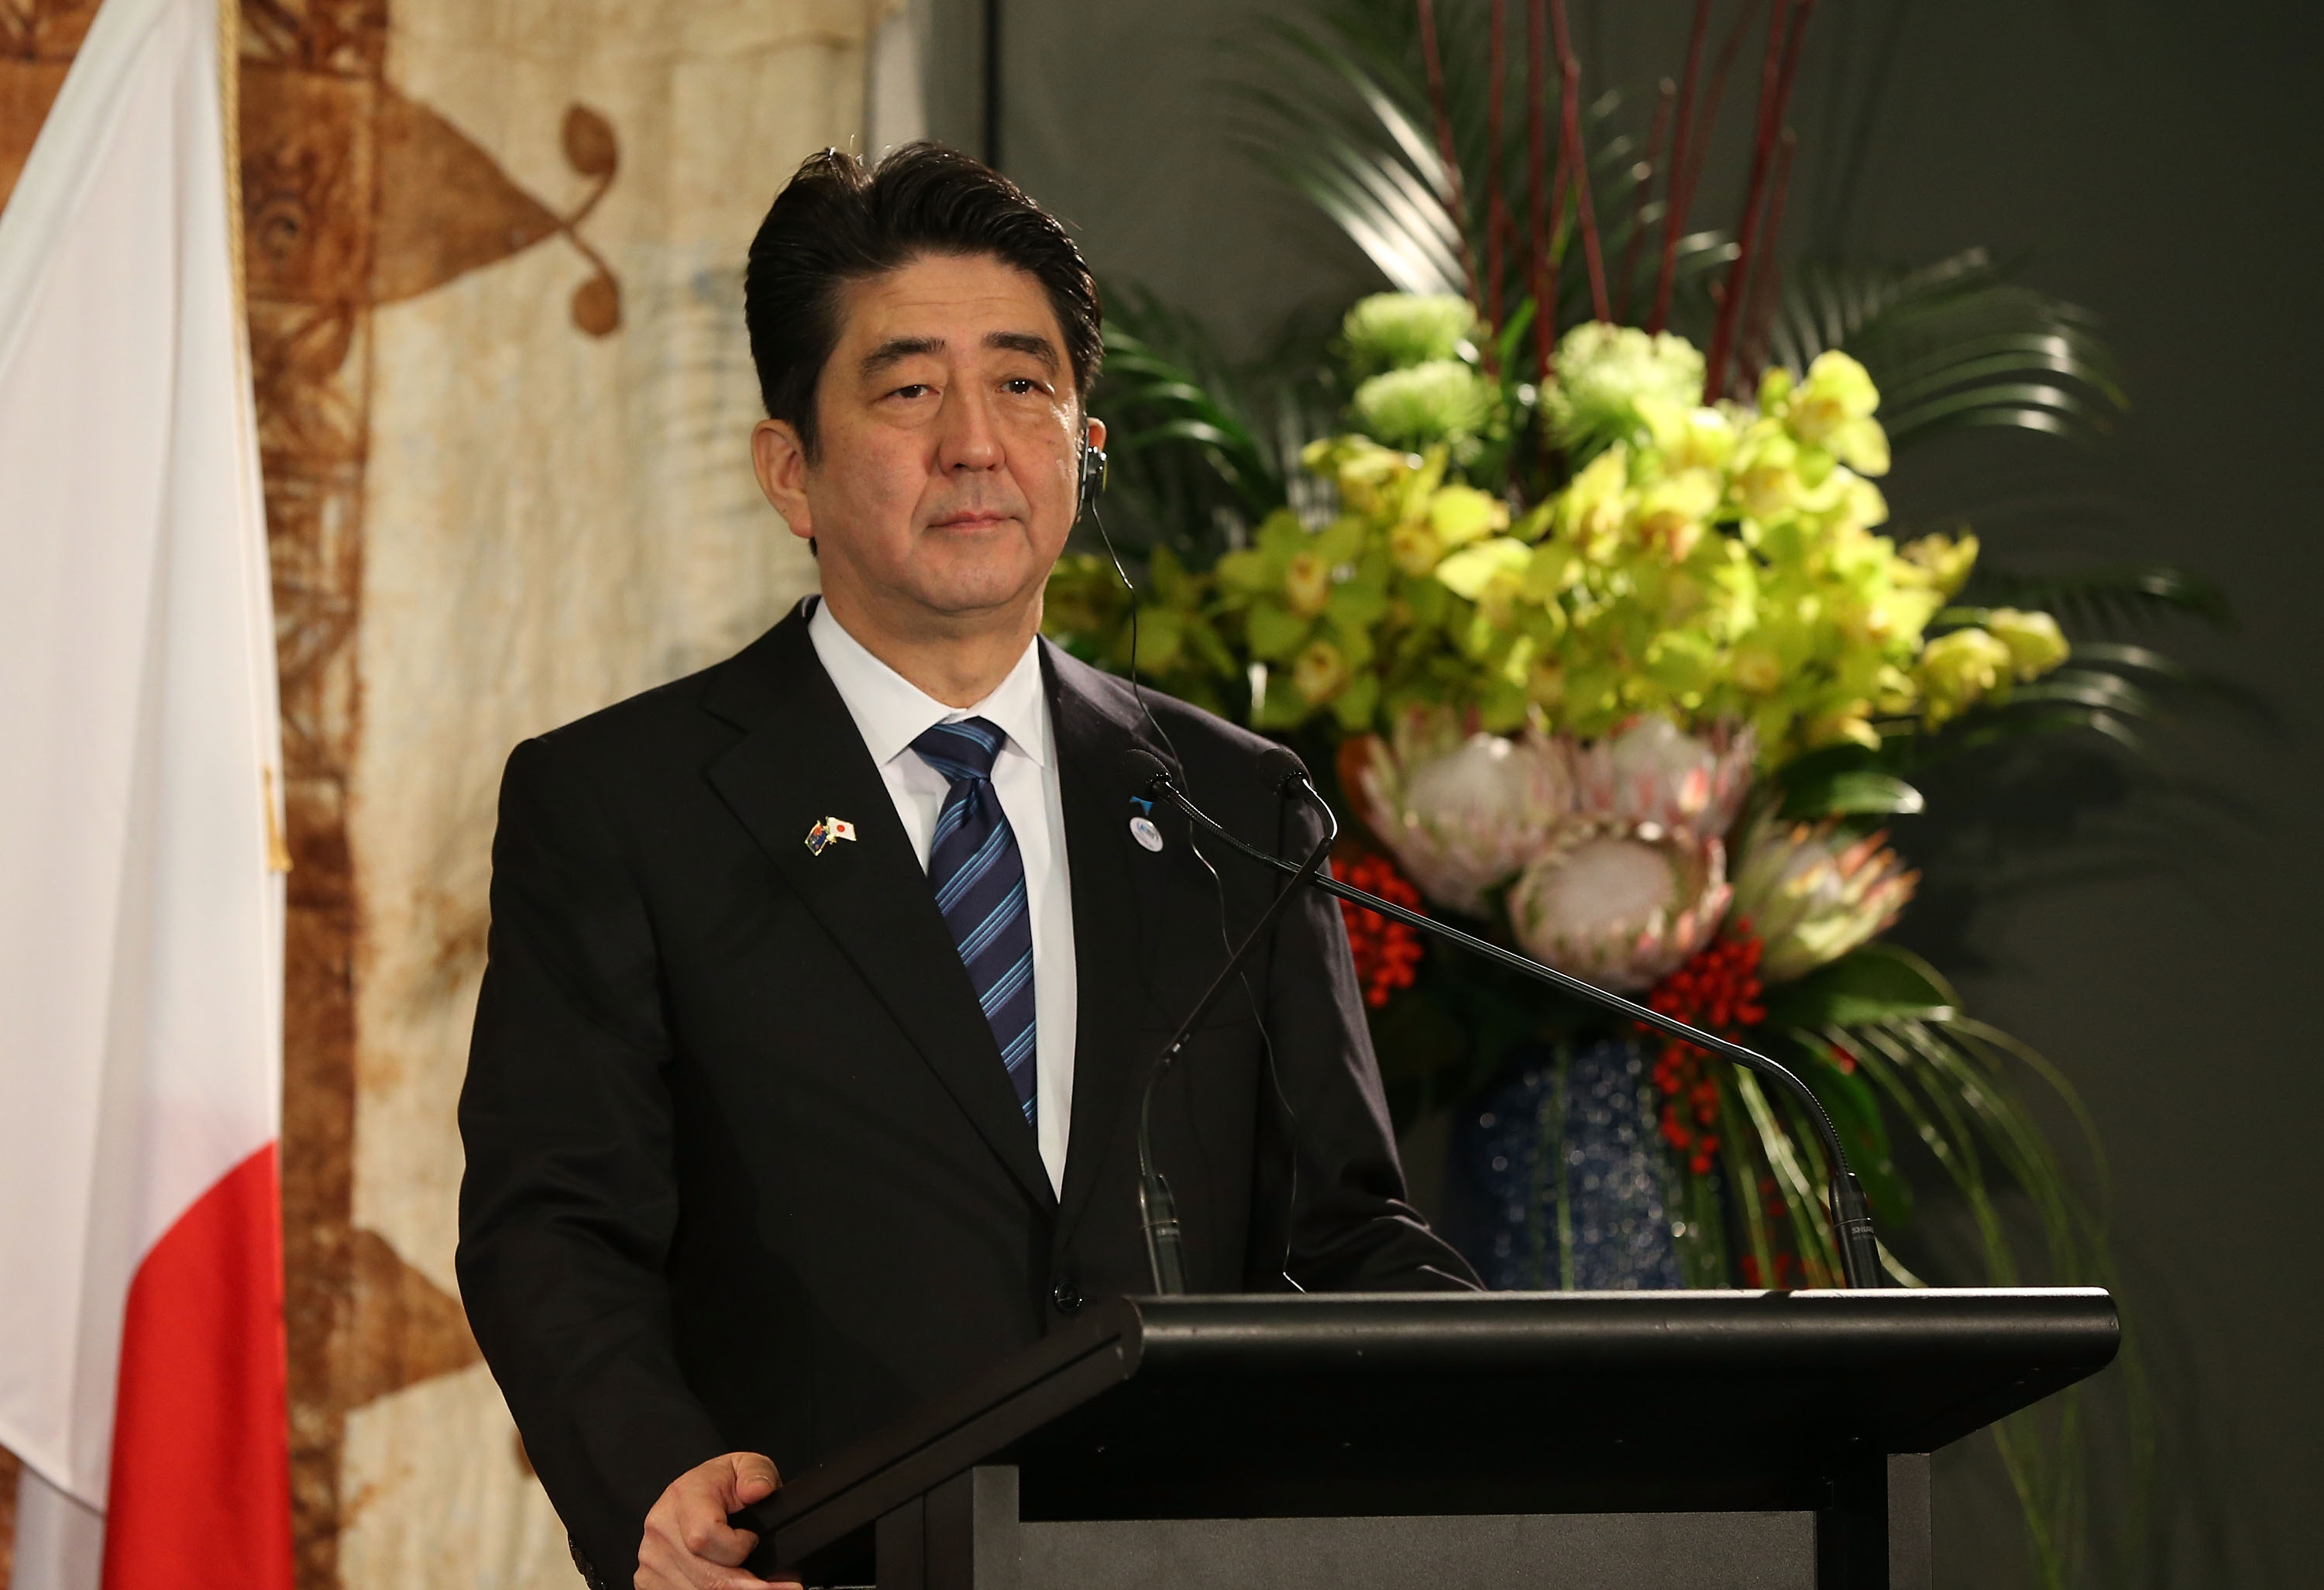 Japanese Prime Minister Shinzo Abe speaks to the media after a traditional Maori welcome at Government House and talks with New Zealand Prime Minister John Key on July 7, 2014, in Auckland. (Fiona Goodall—Getty Images)